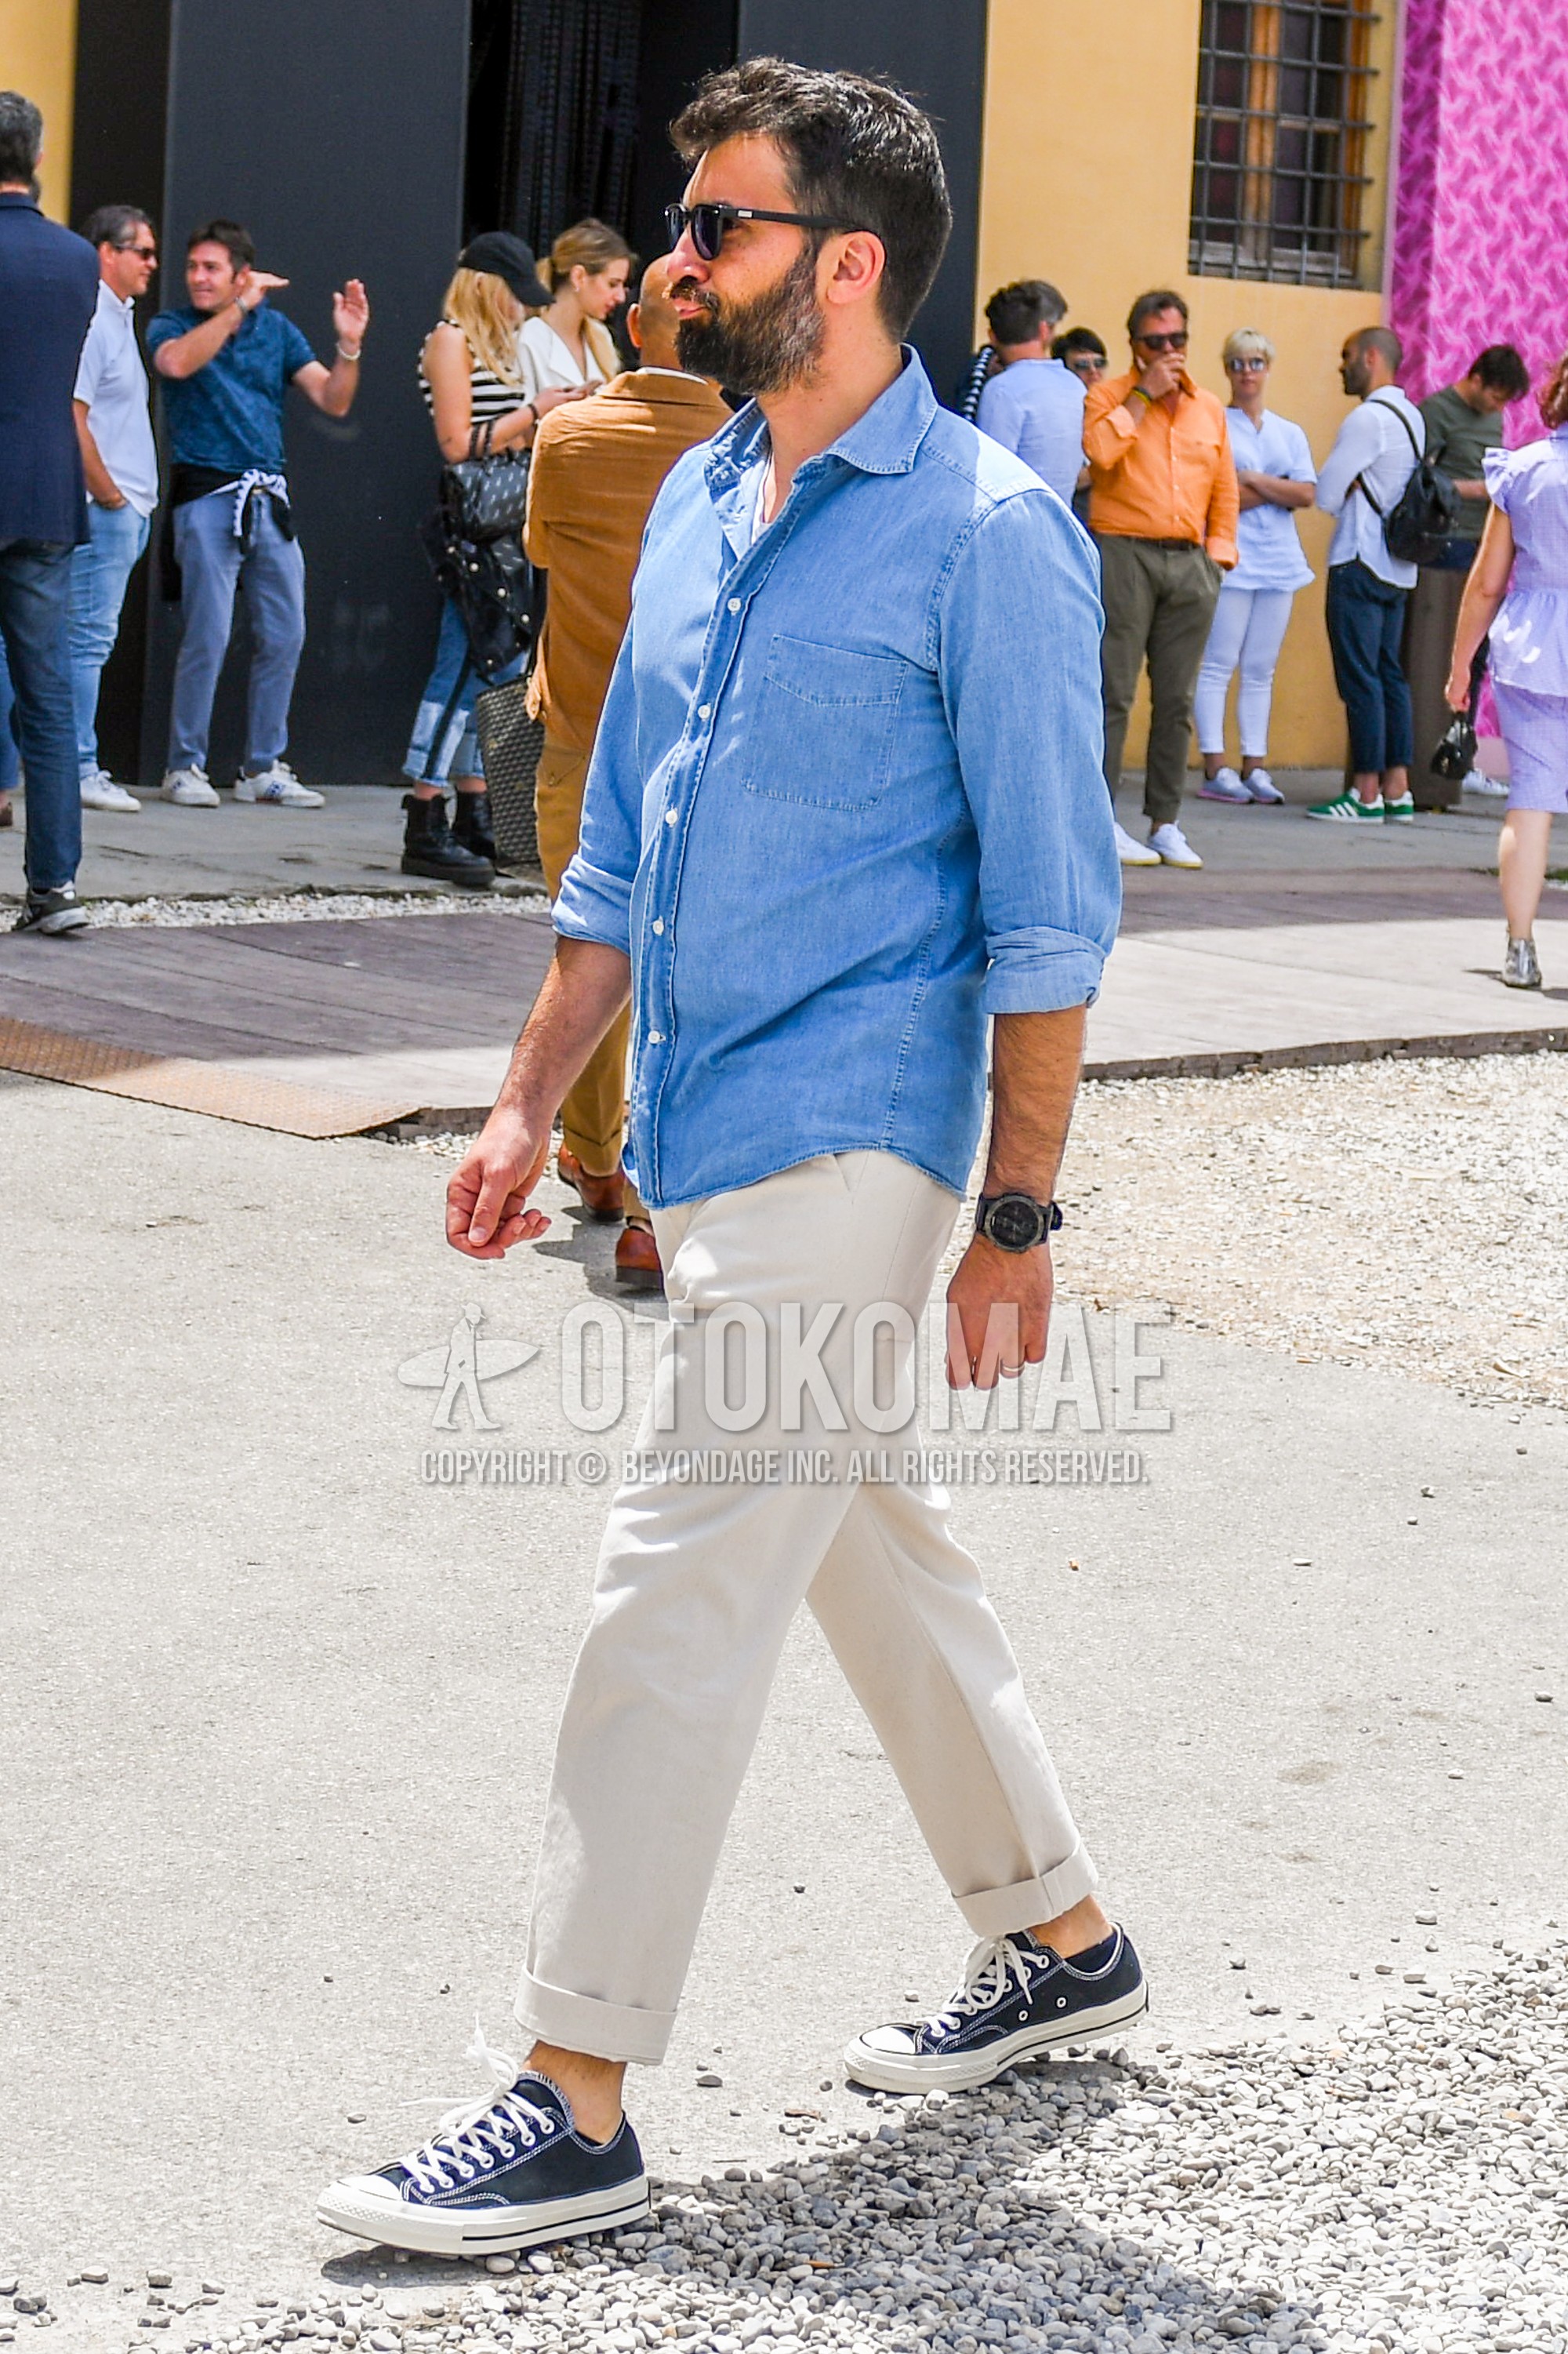 Men's spring summer outfit with plain sunglasses, blue plain denim shirt/chambray shirt, beige plain chinos, navy low-cut sneakers.